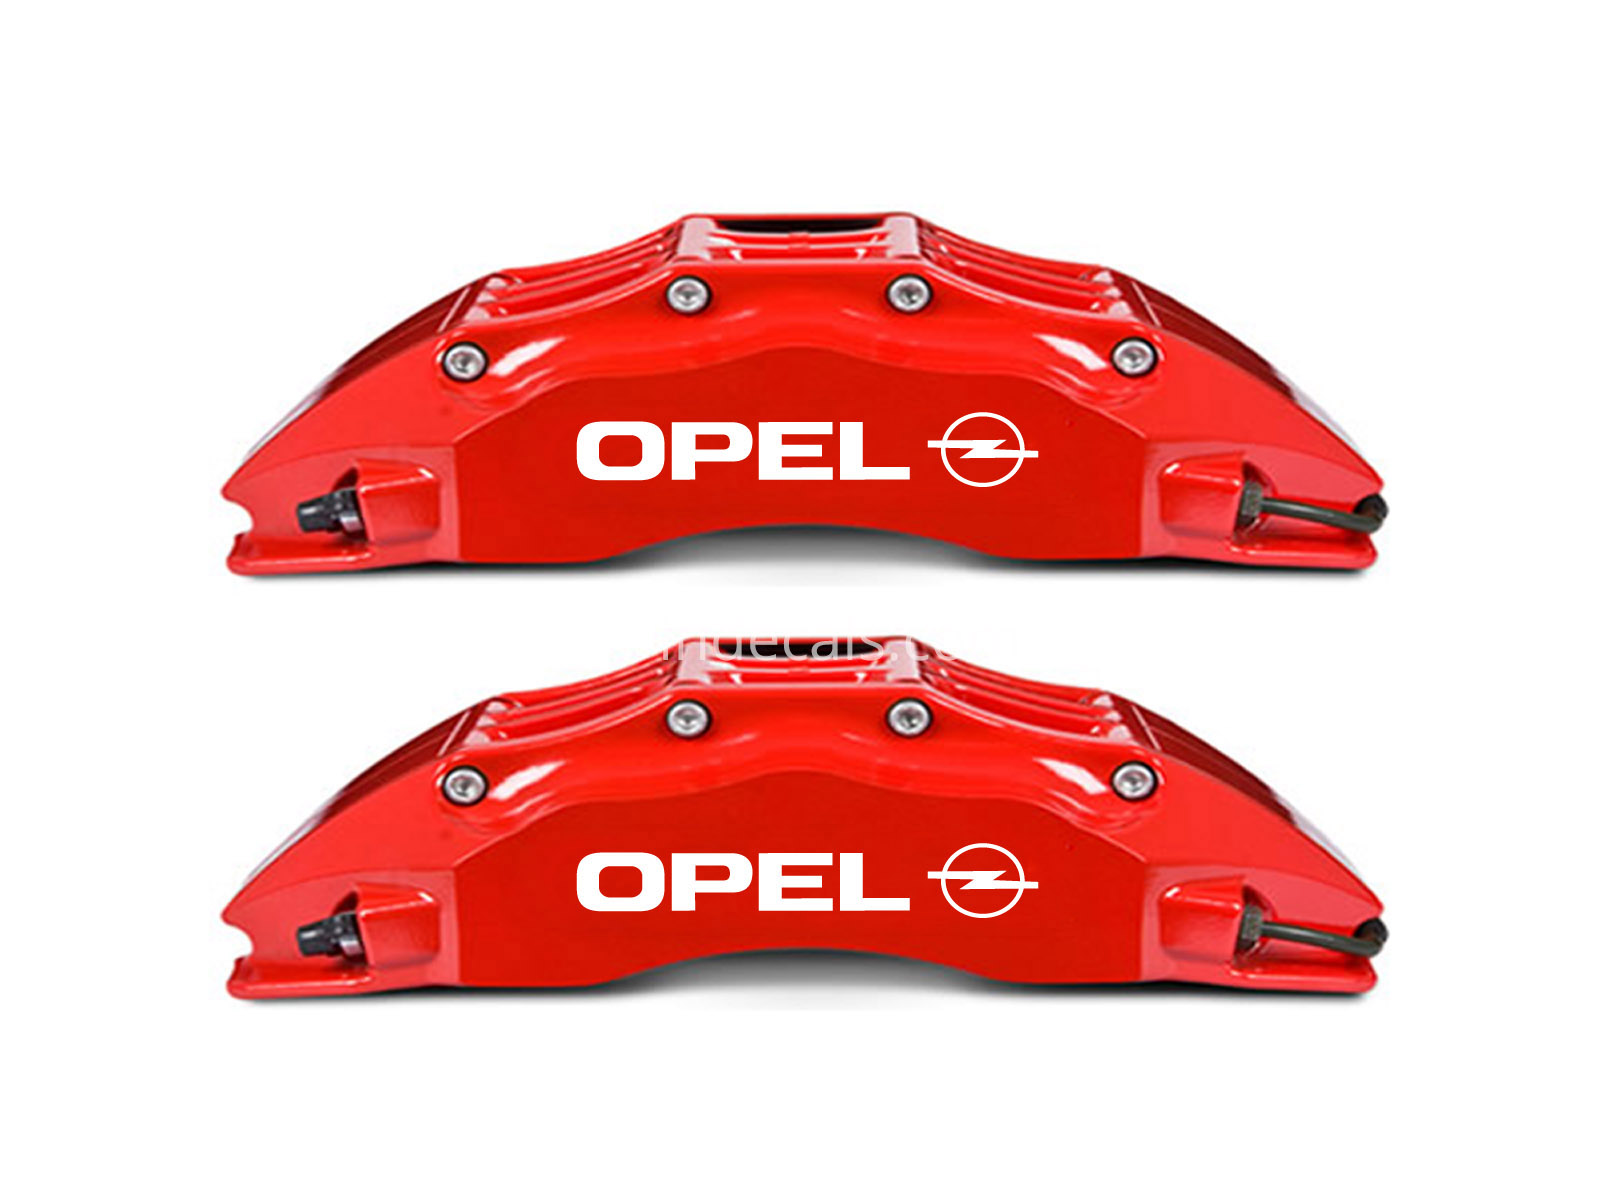 6 x Opel Stickers for Brakes - White